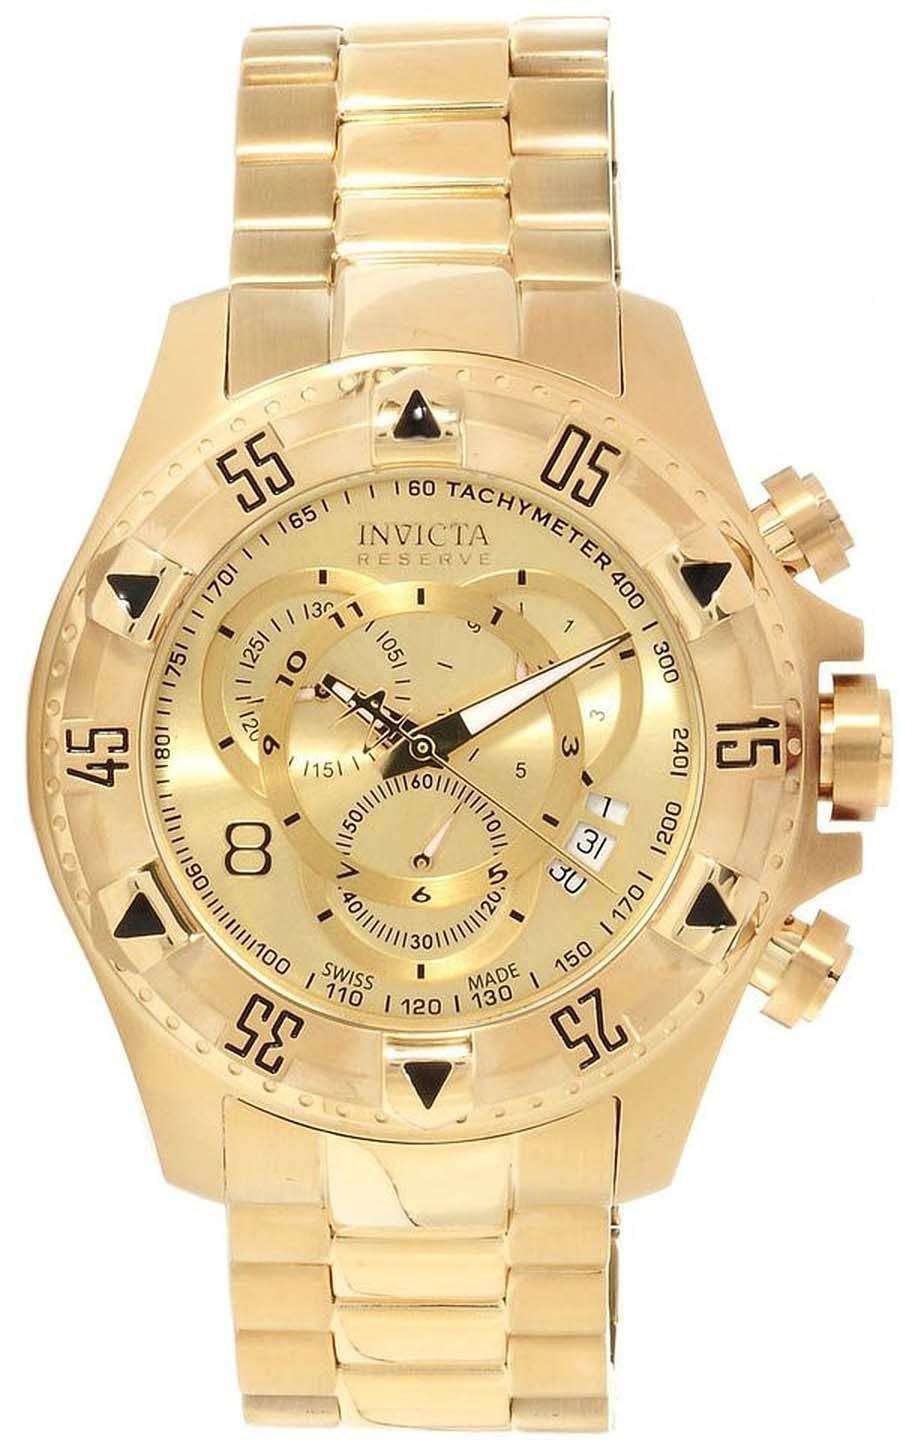 Invicta Reserve Chronograph 14473 Men's Watch - CityWatches.co.uk